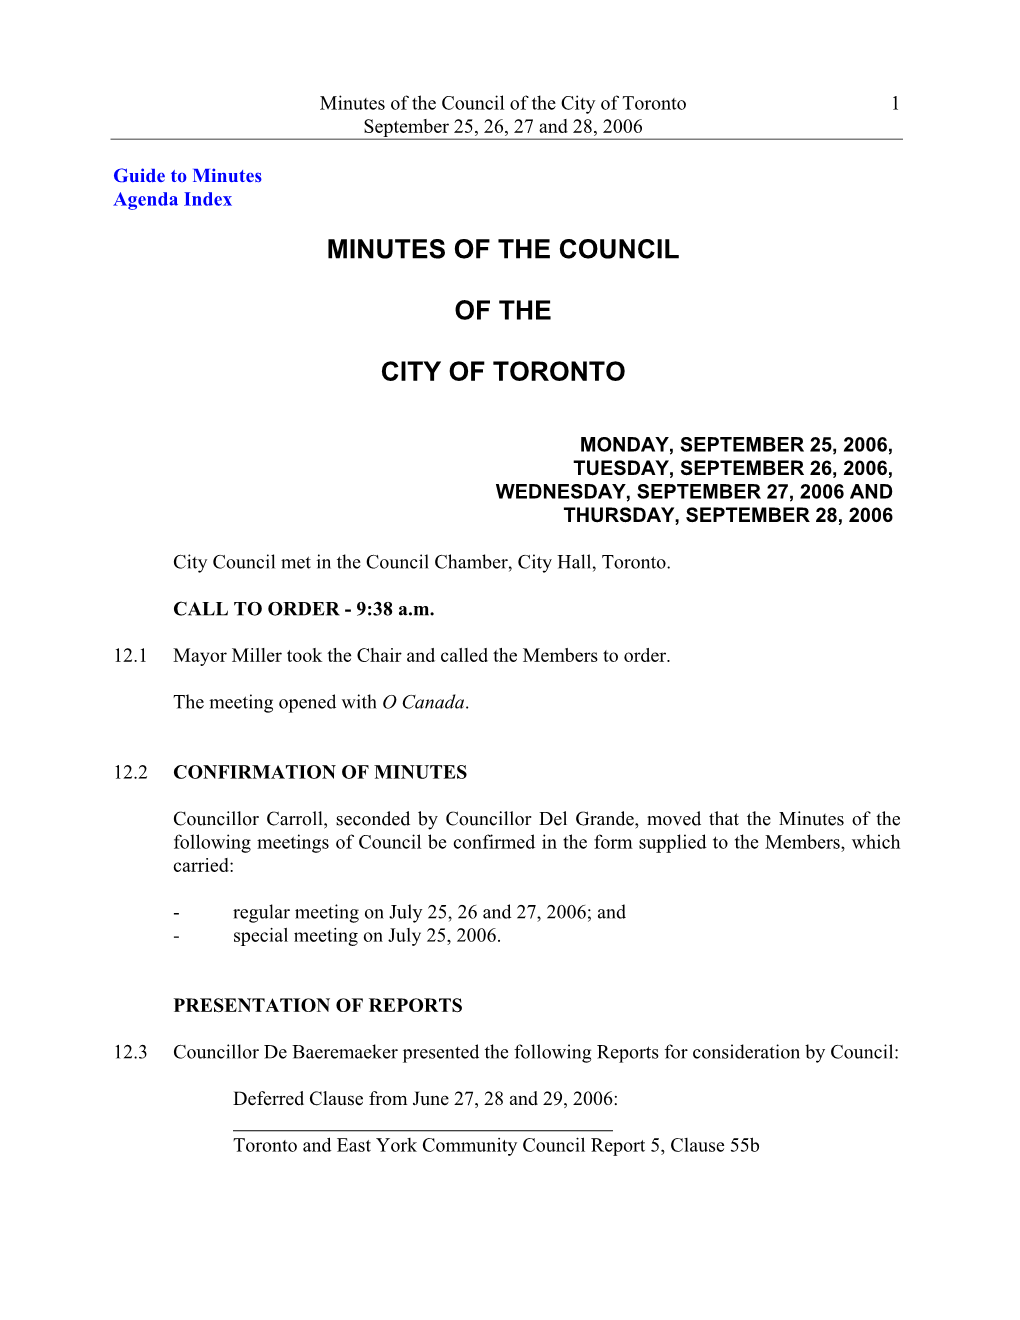 Minutes of the Council of the City of Toronto 1 September 25, 26, 27 and 28, 2006